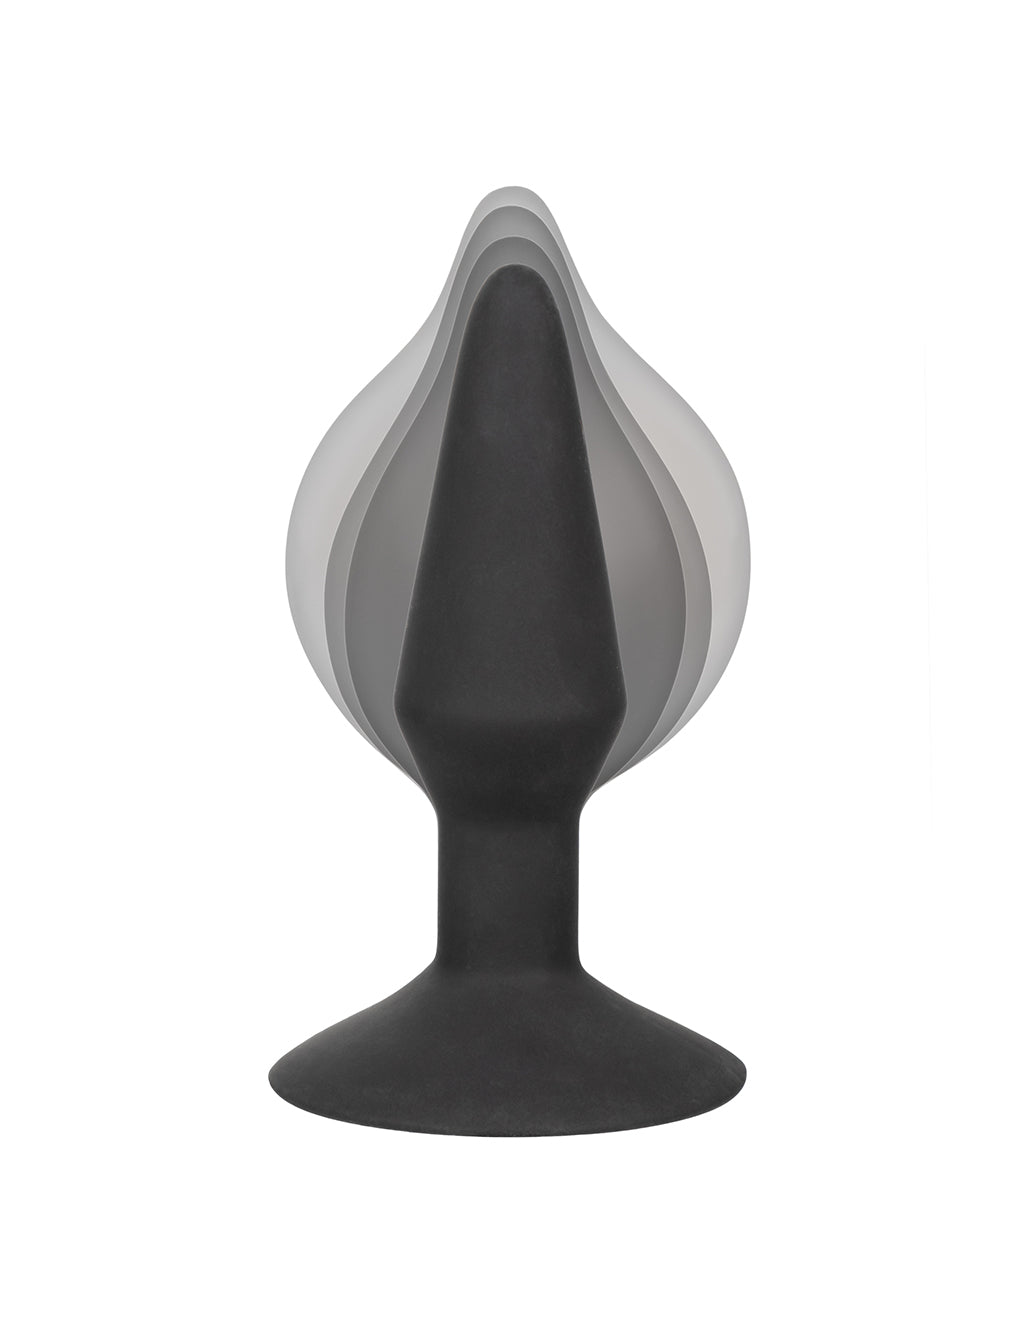 Medium Silicone Inflatable Plug- Inflated Size Levels